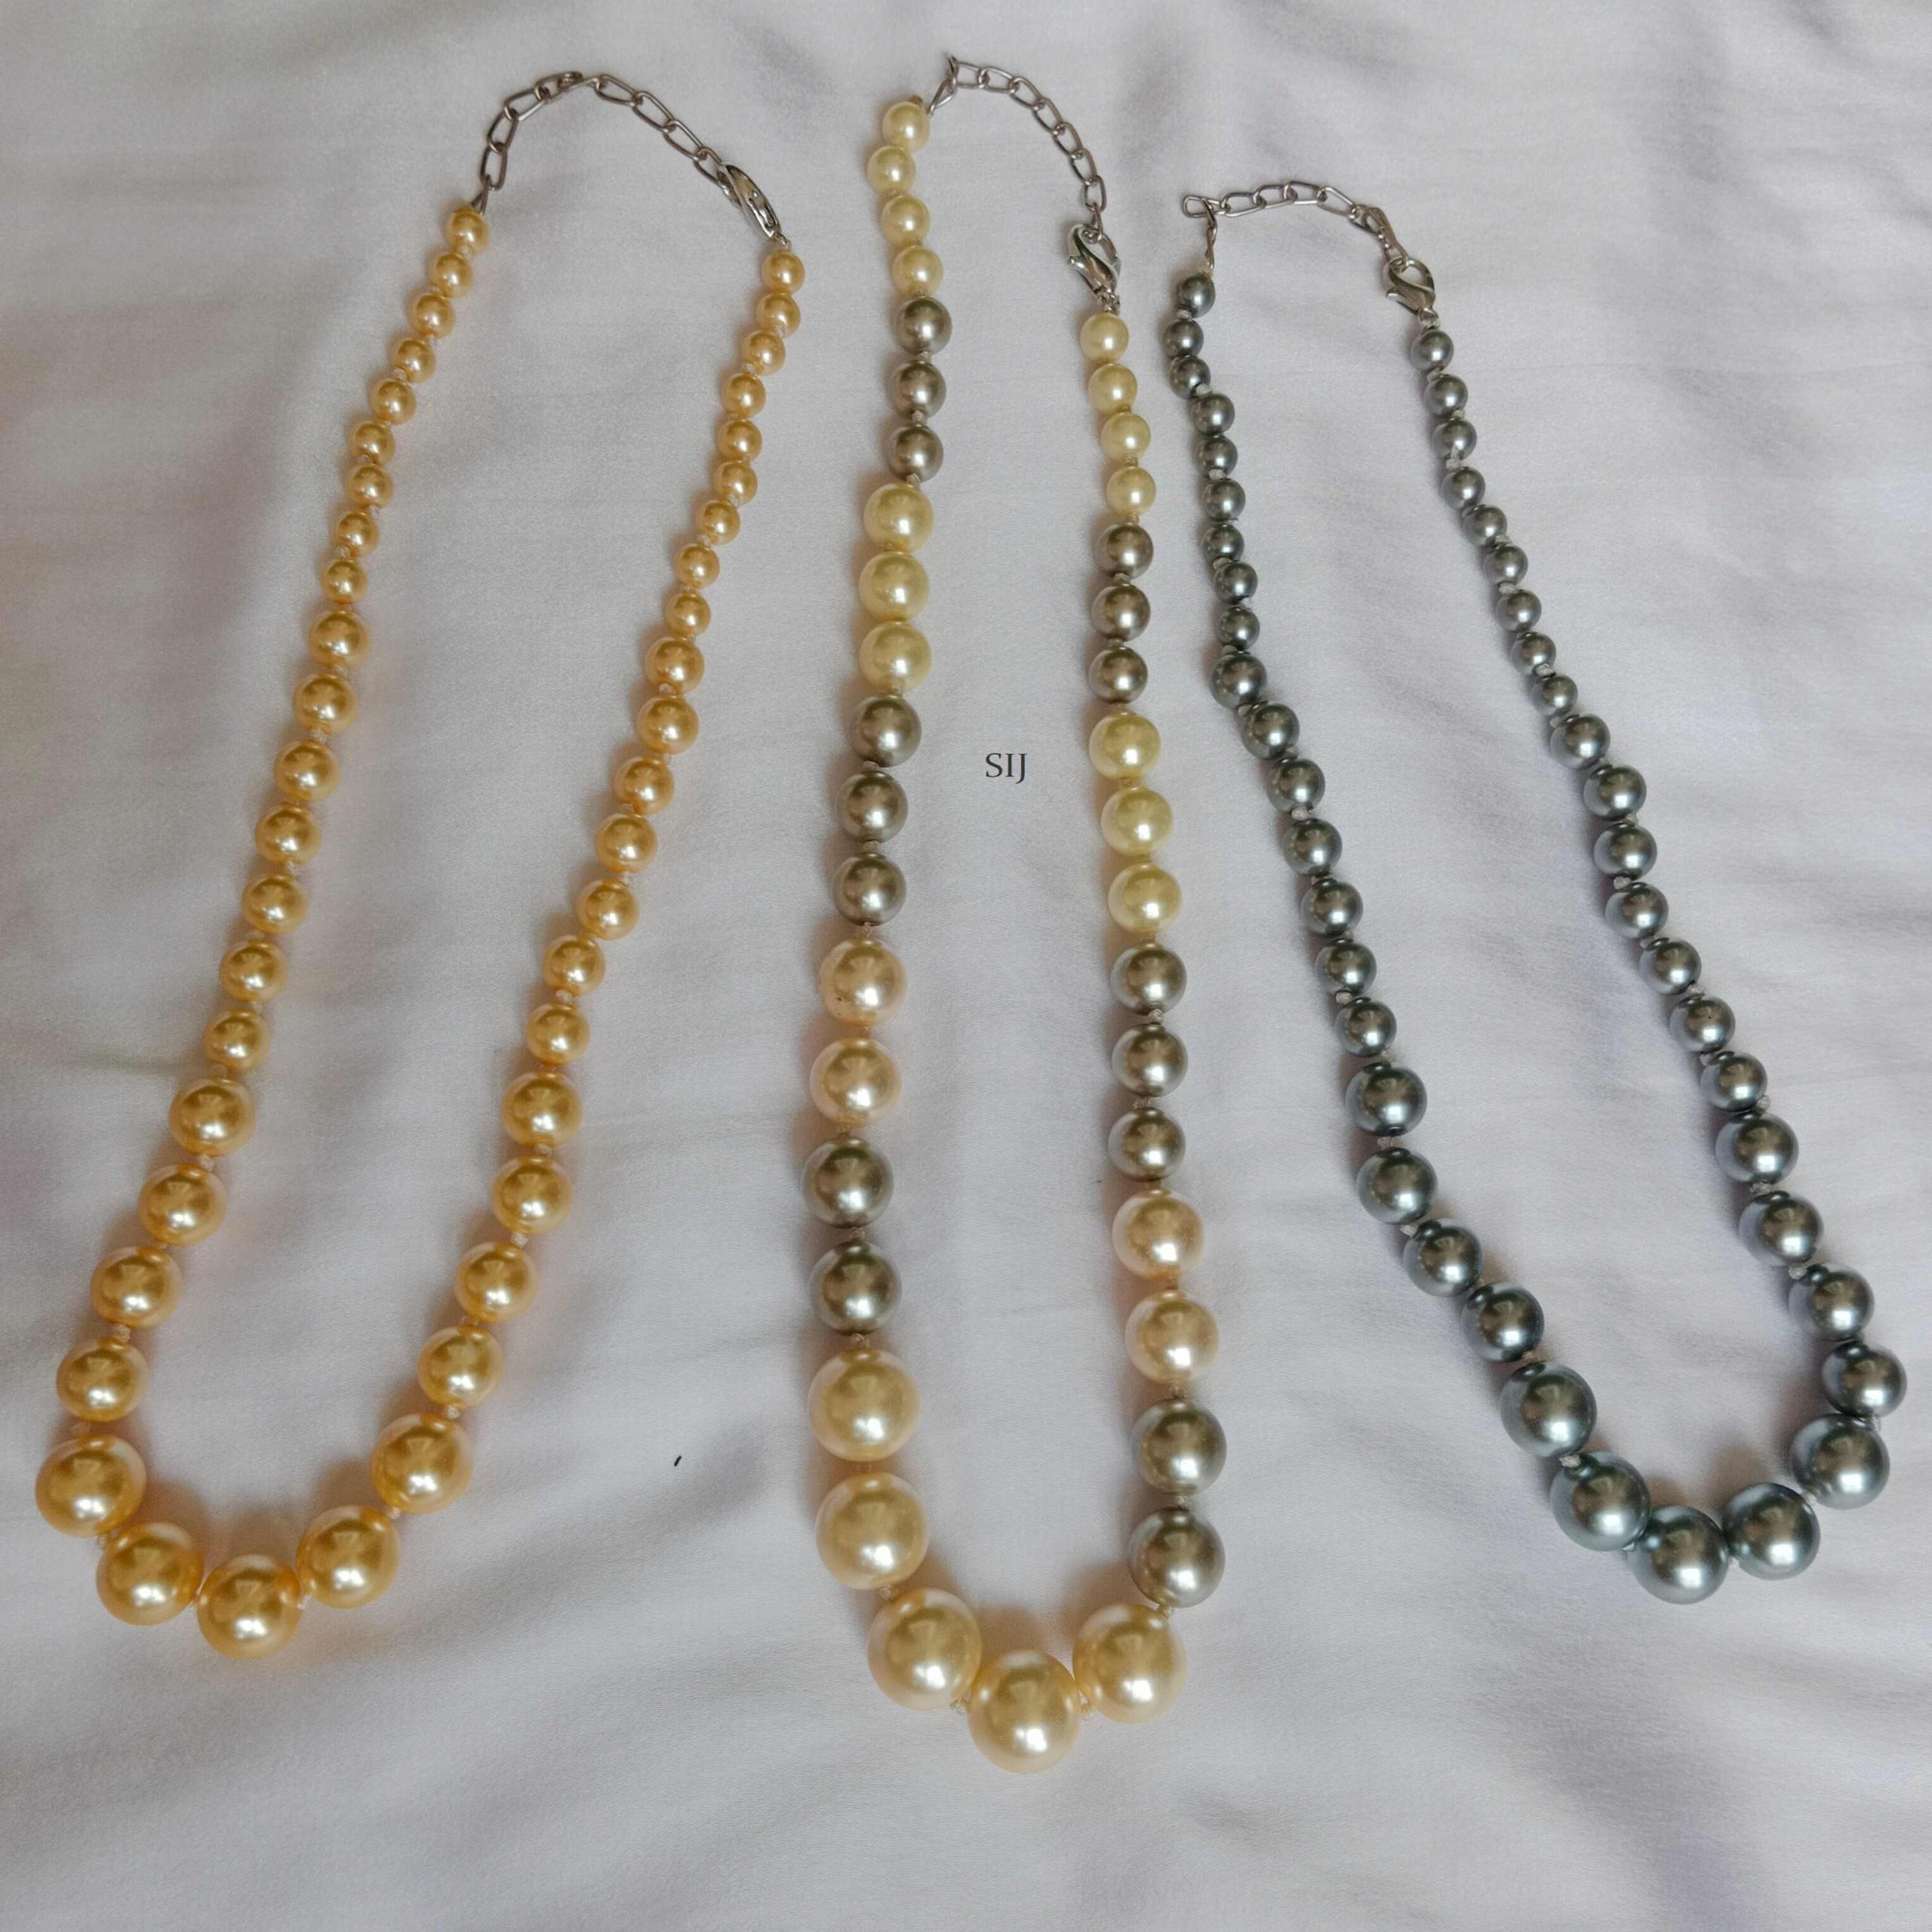 Pearl Chains Combo with Big Pearls in Between